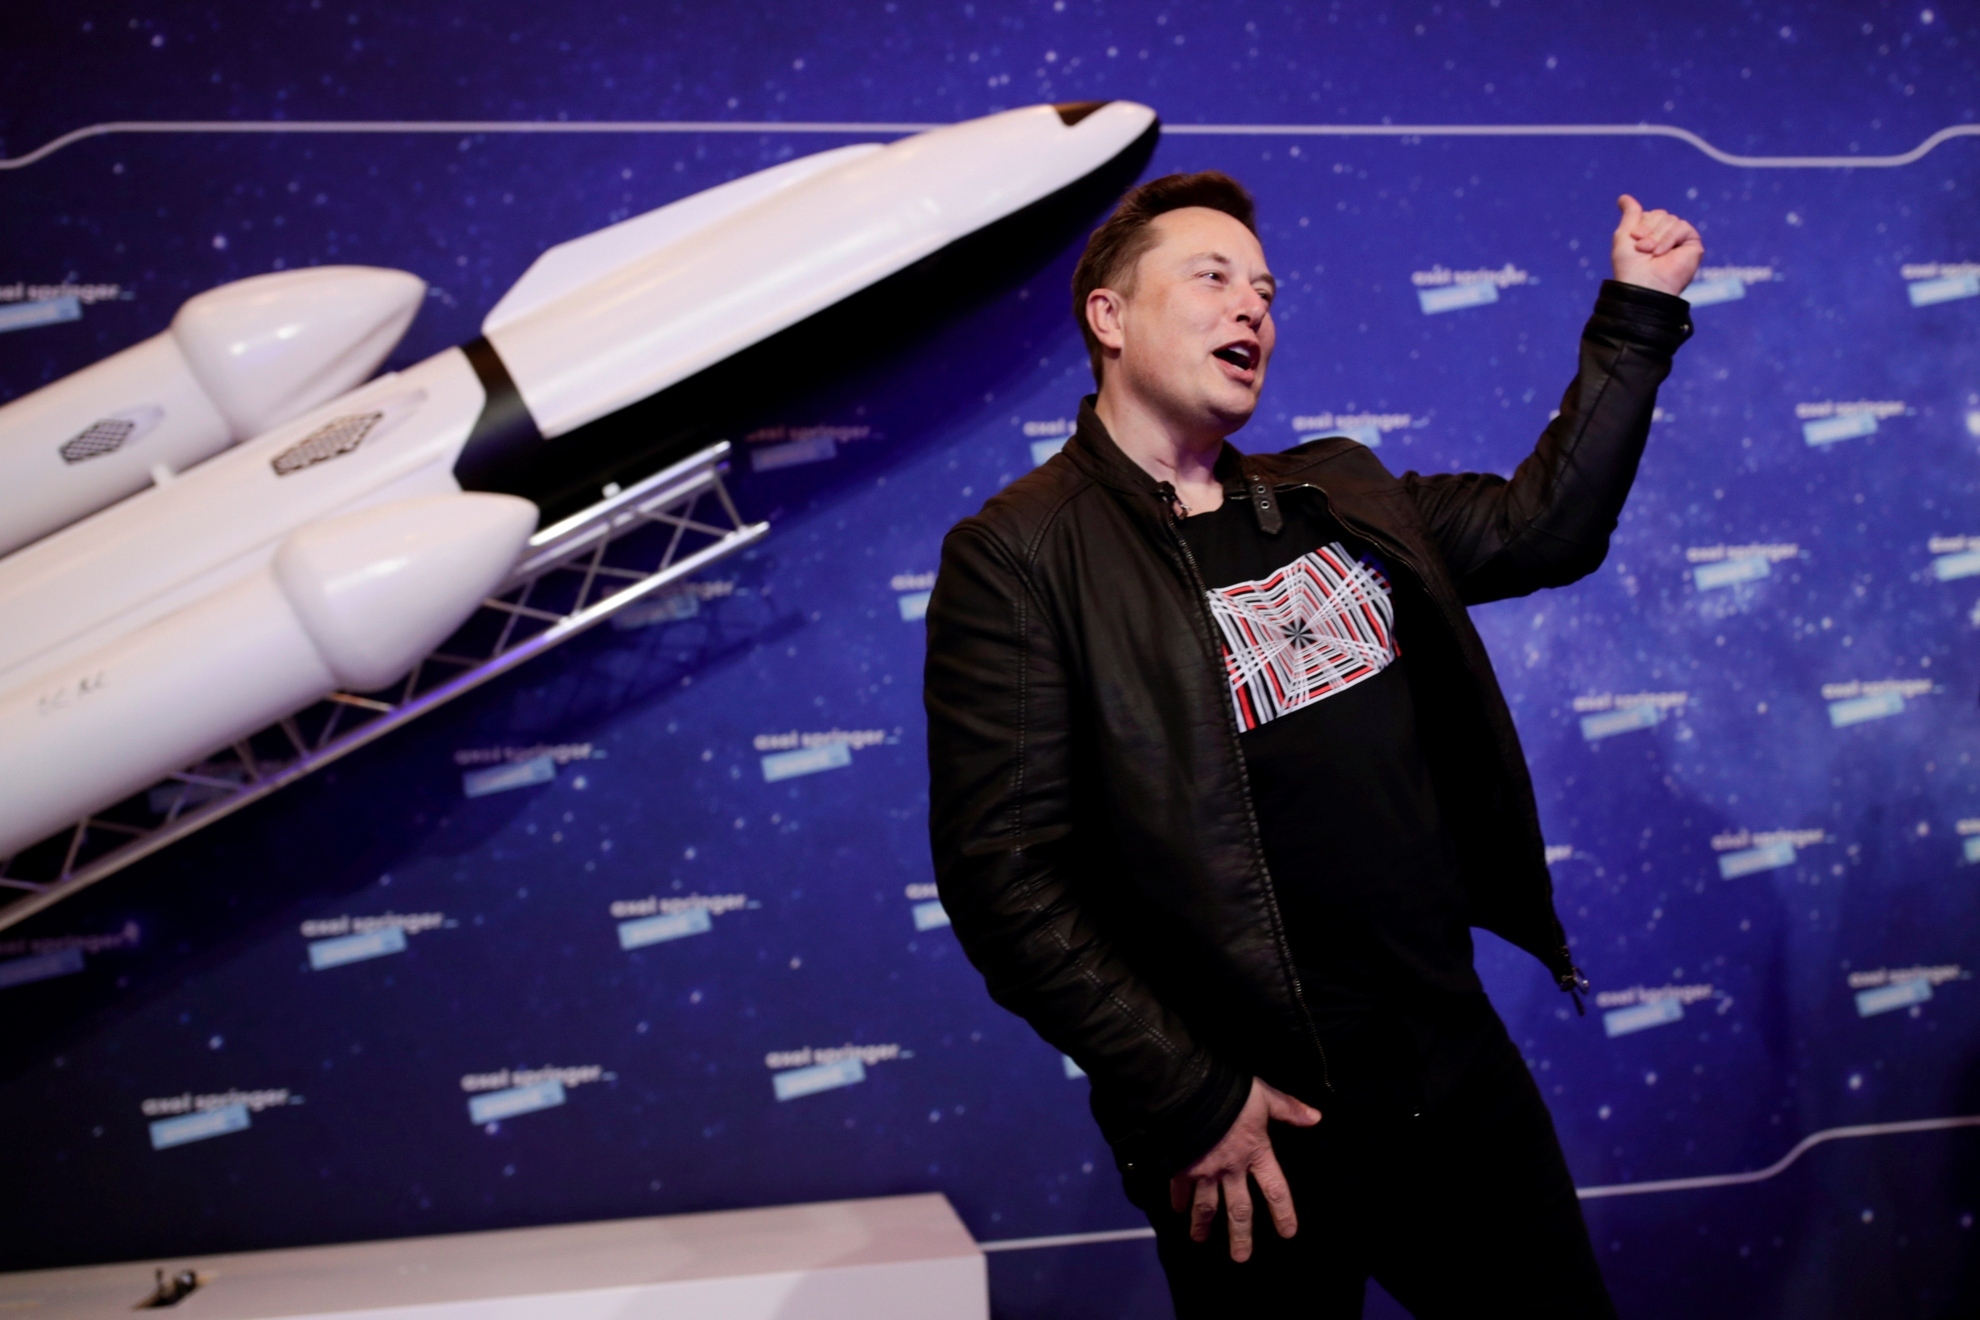 Elon Musk at SpaceX event